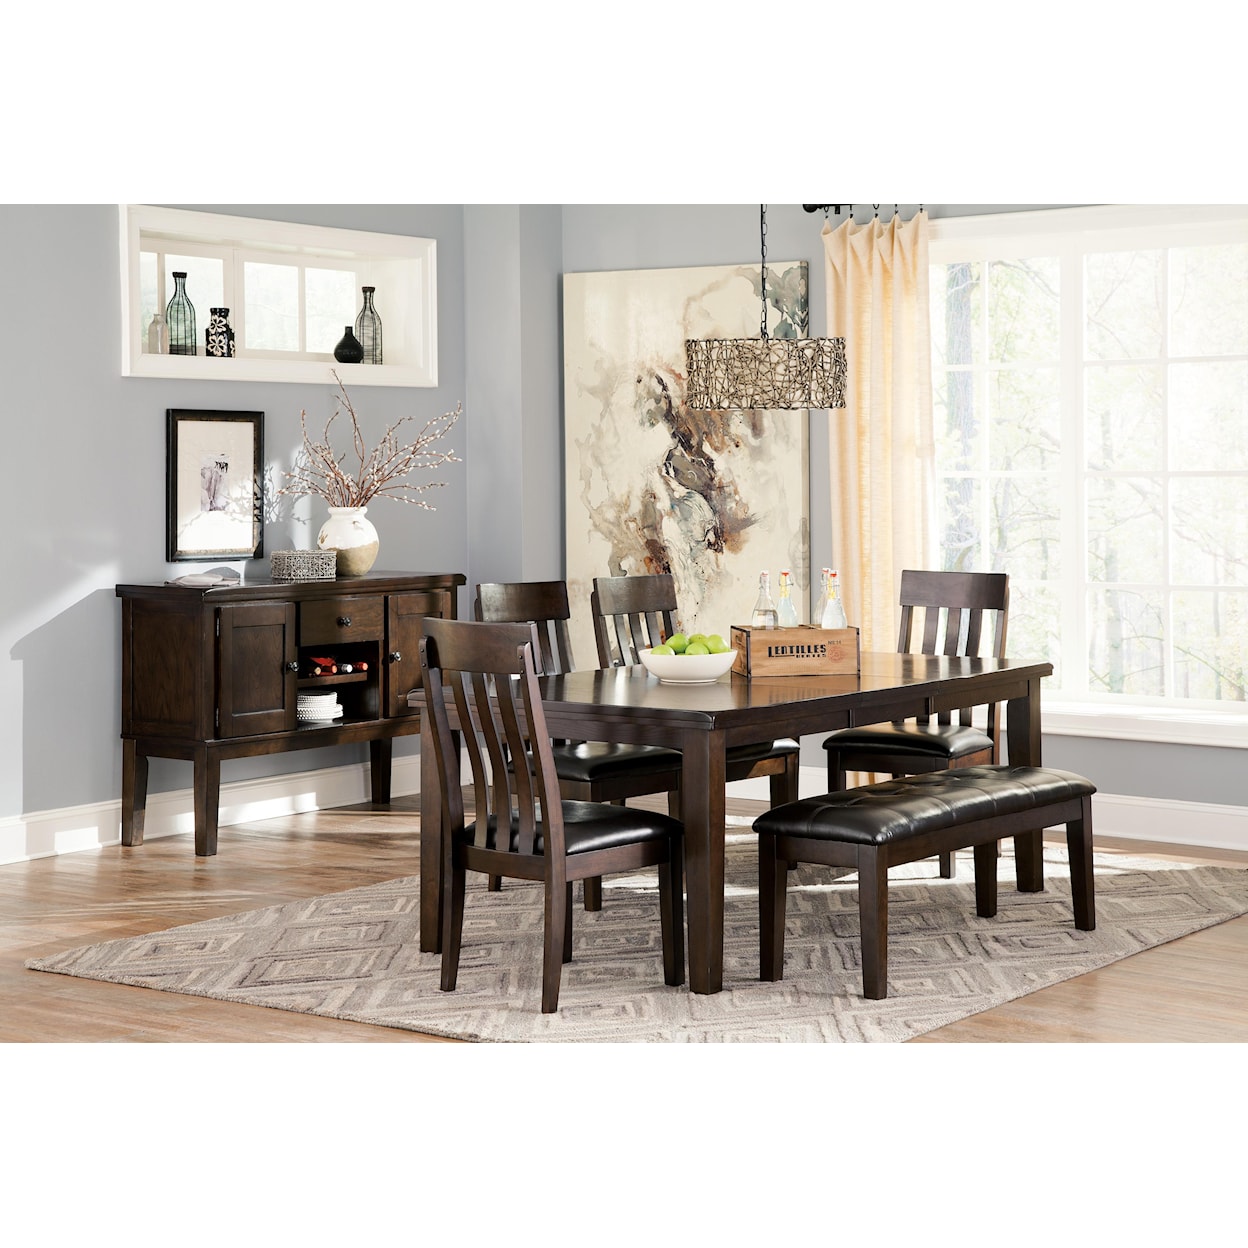 Ashley Furniture Signature Design Haddigan 6-Piece Table, Chair and Bench Set